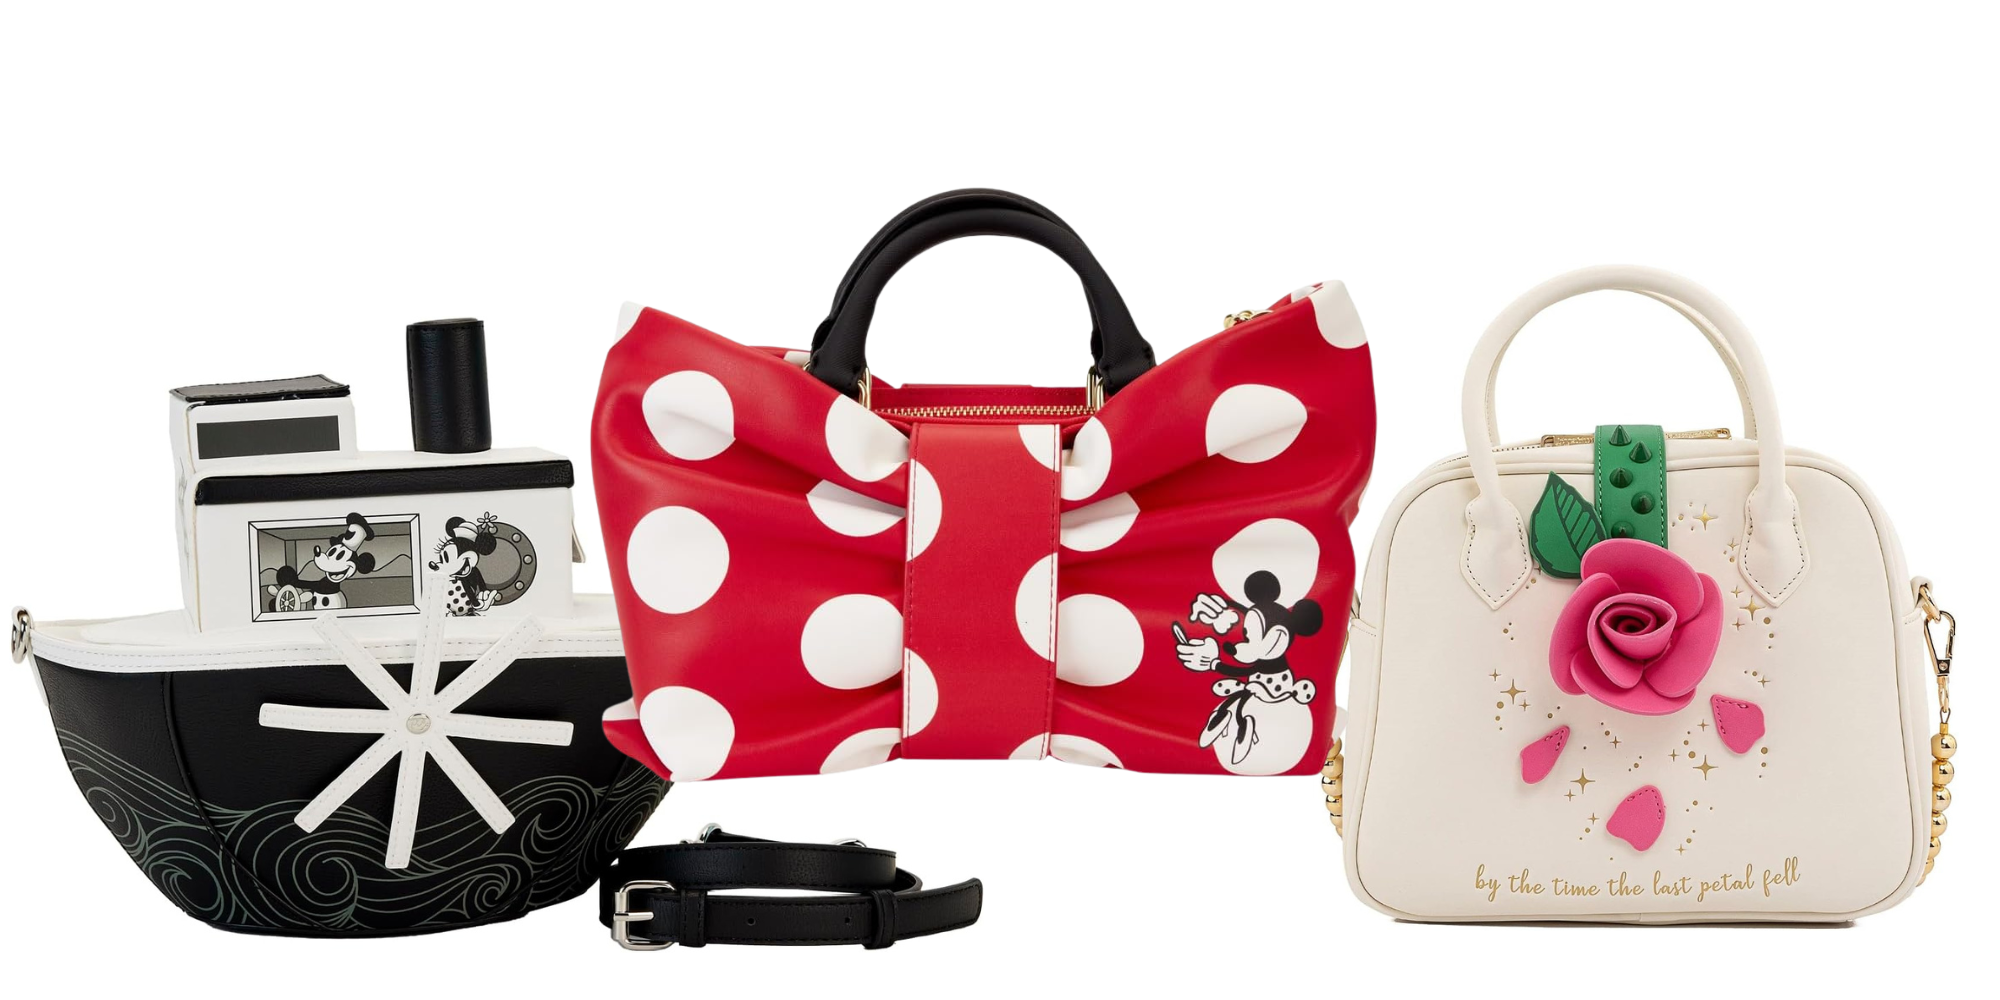 Pin by Allison on BACKPACKS | Loungefly bag, Disney purse, Purses